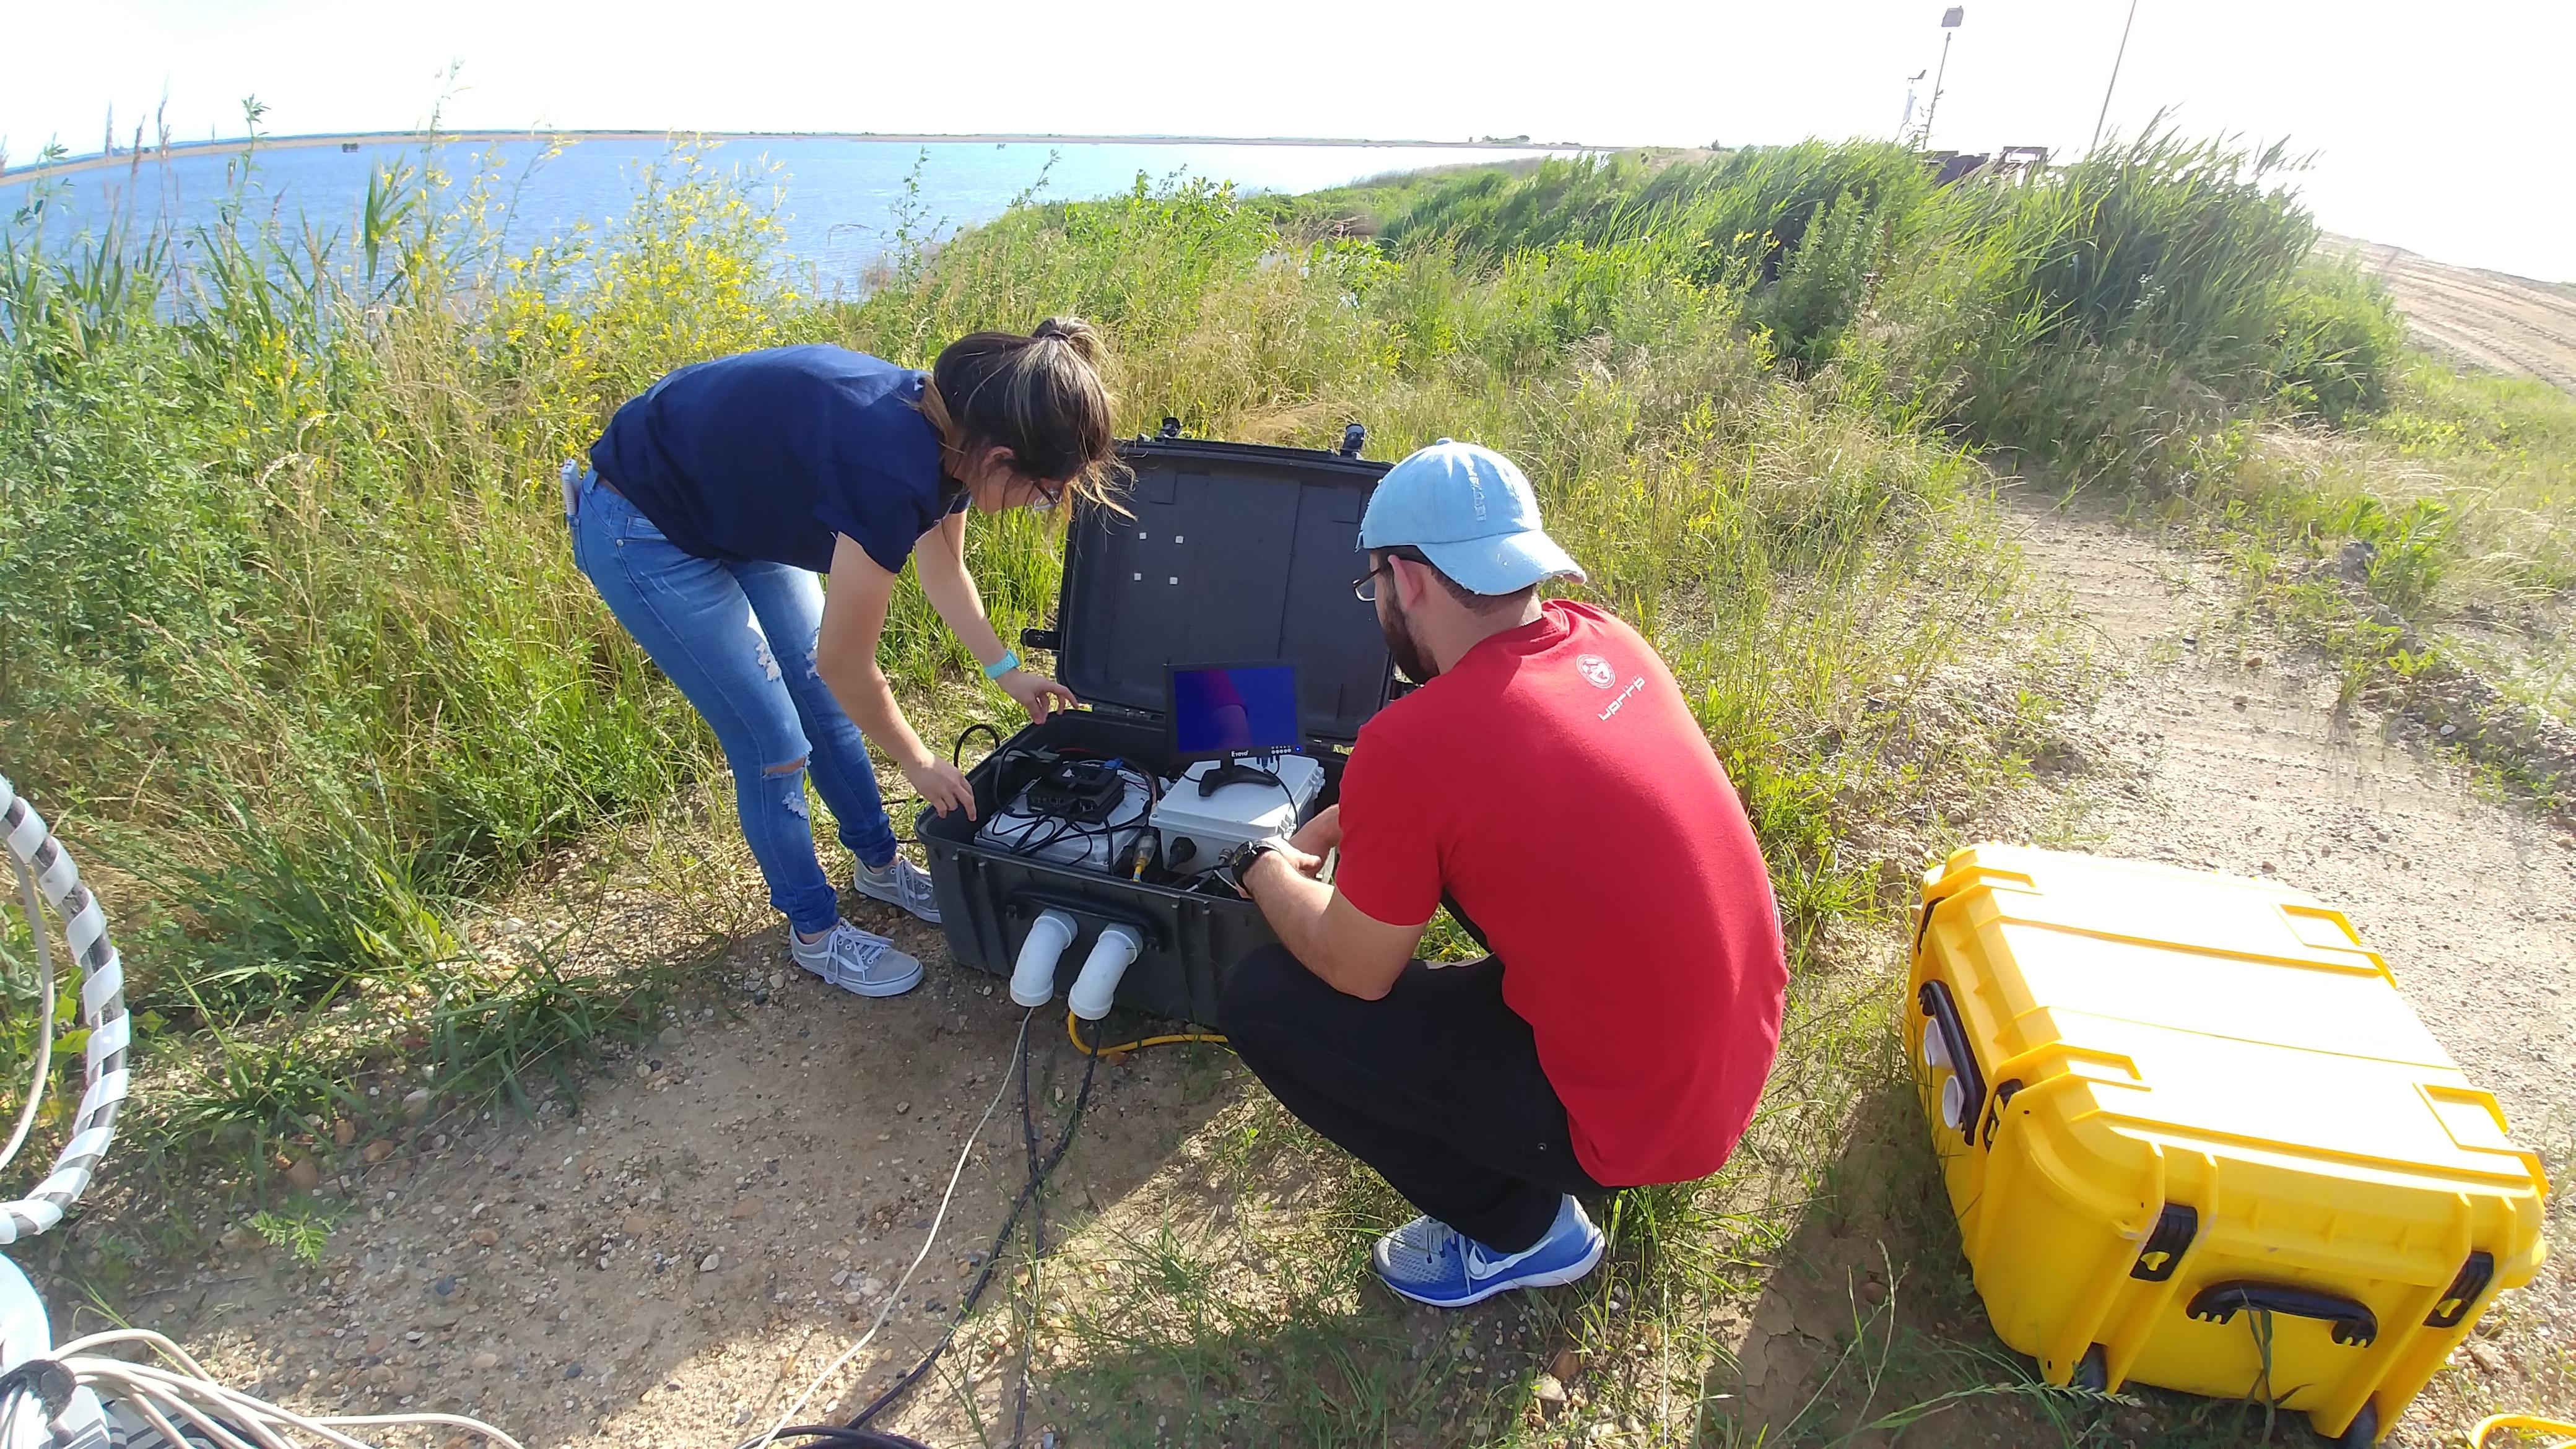 Technicians observing instrument performance in the field.